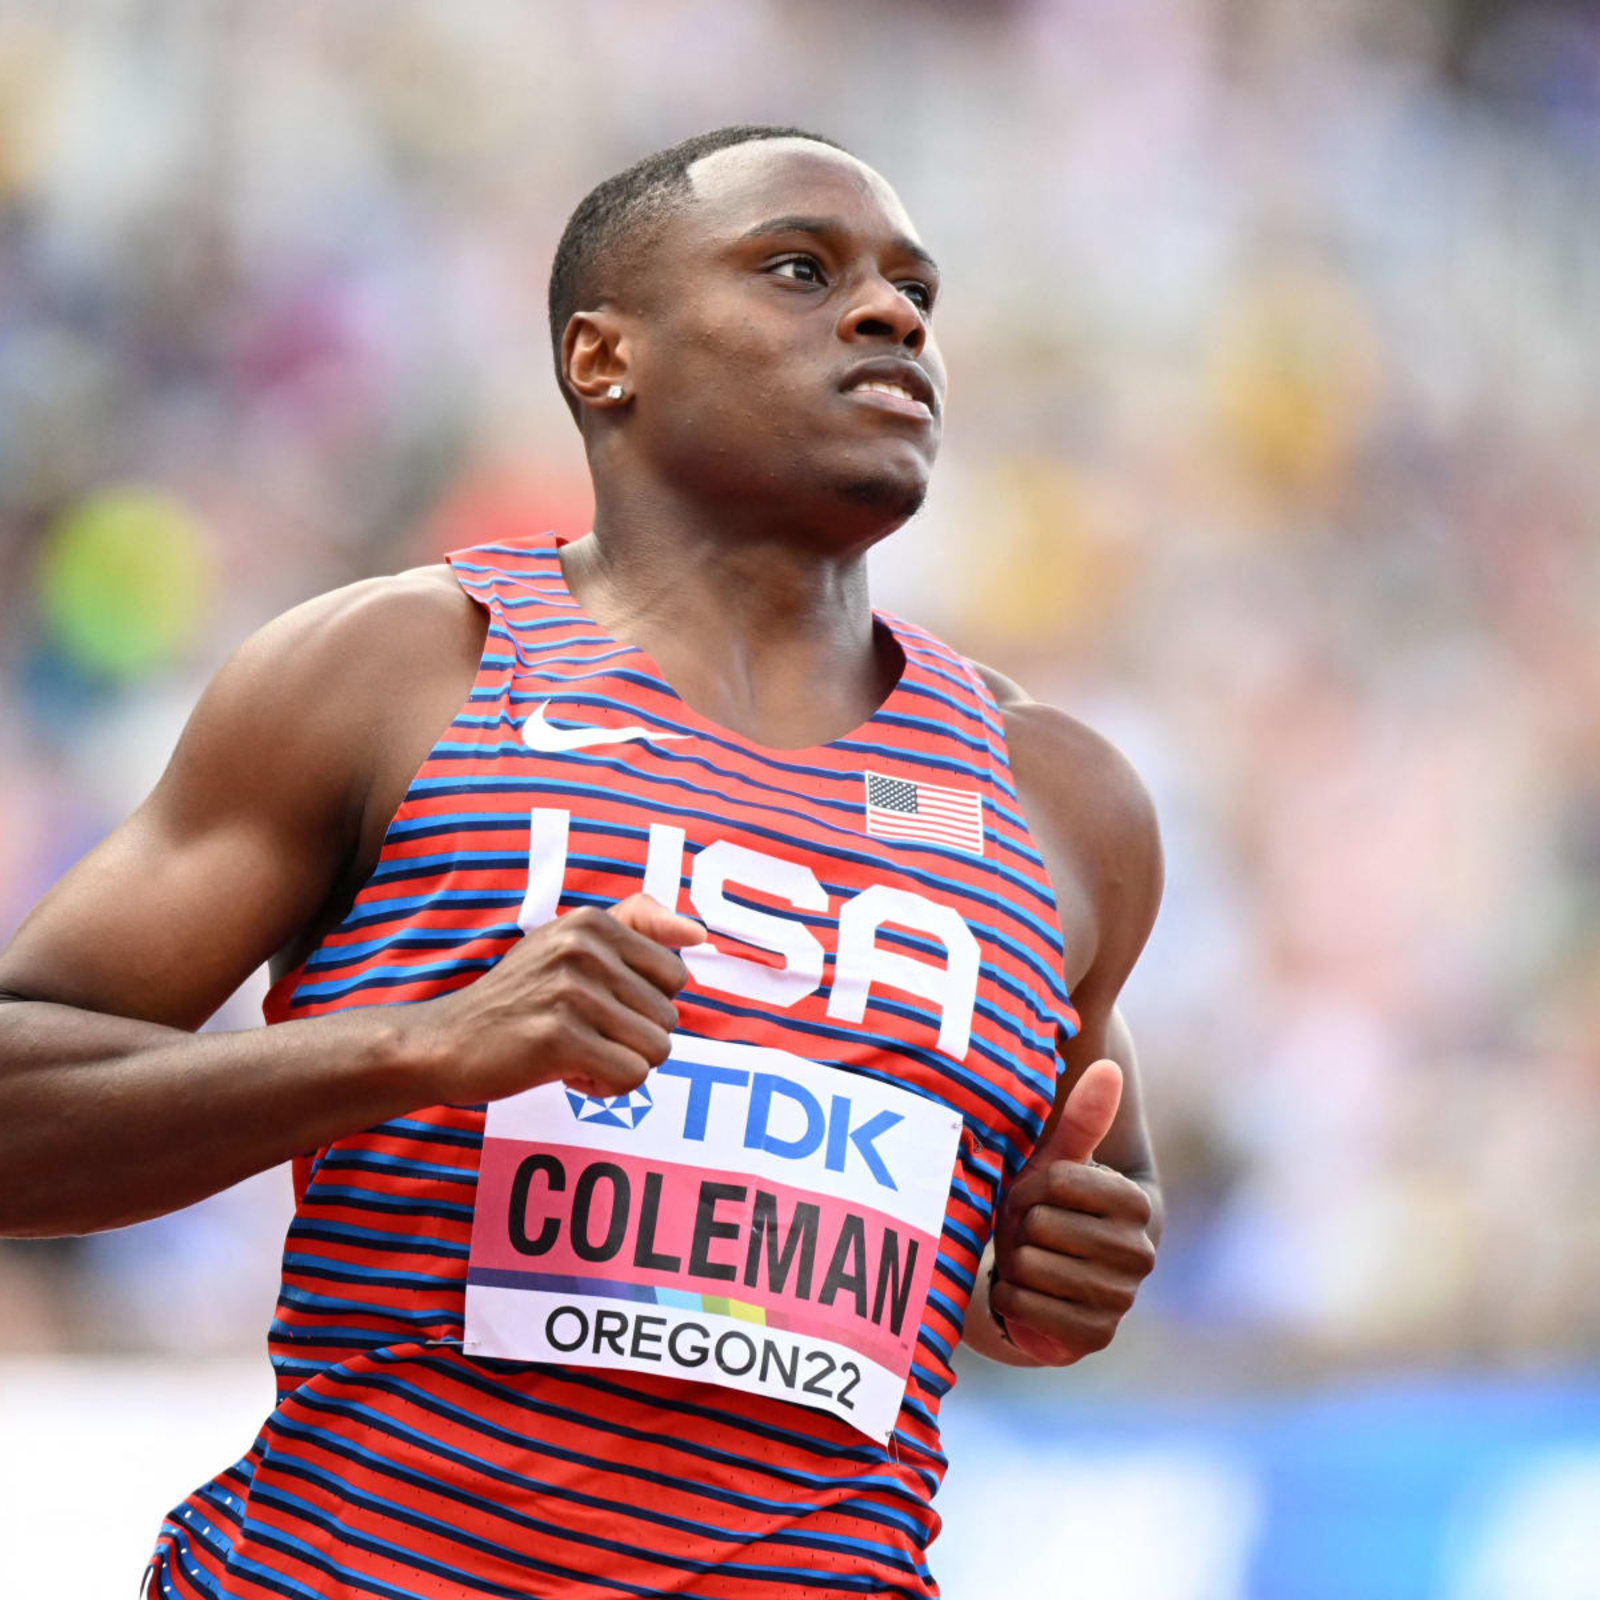 USA's Christian Coleman: Tyreek Hill Wouldn't Beat Me, Didn't Race